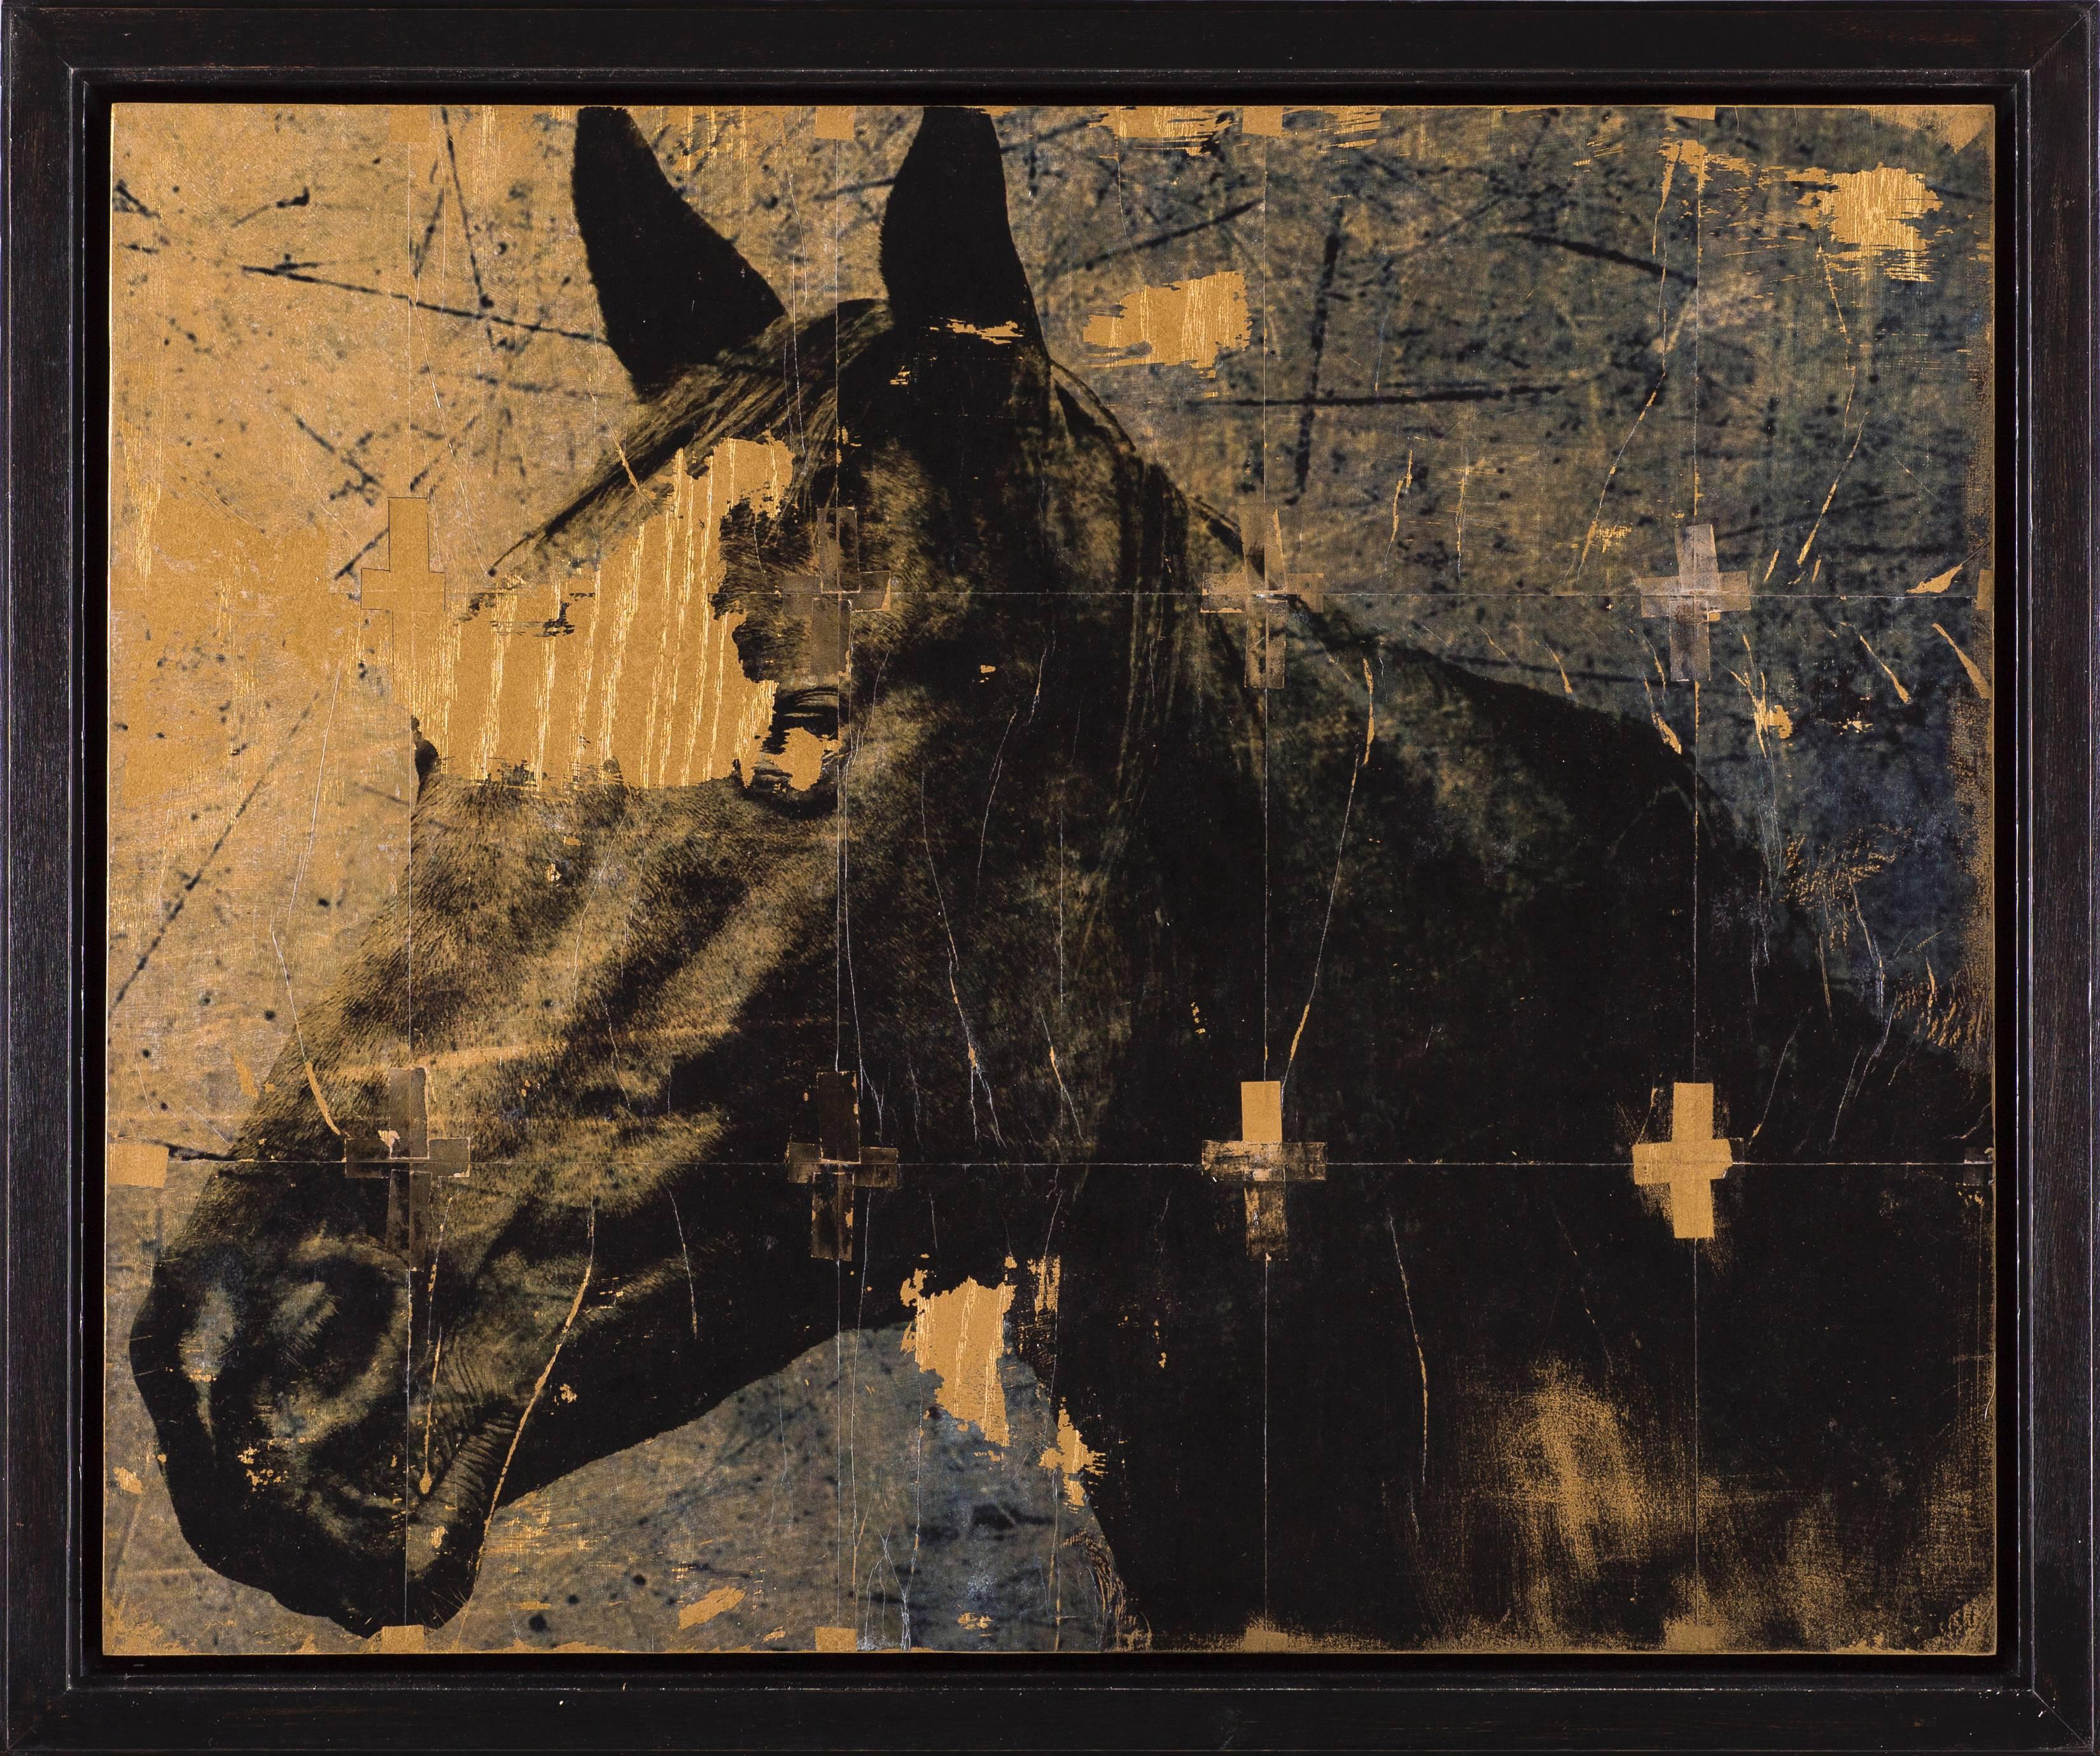 Kelly Breedlove Portrait Photograph - Untitled (Horses As Religion)